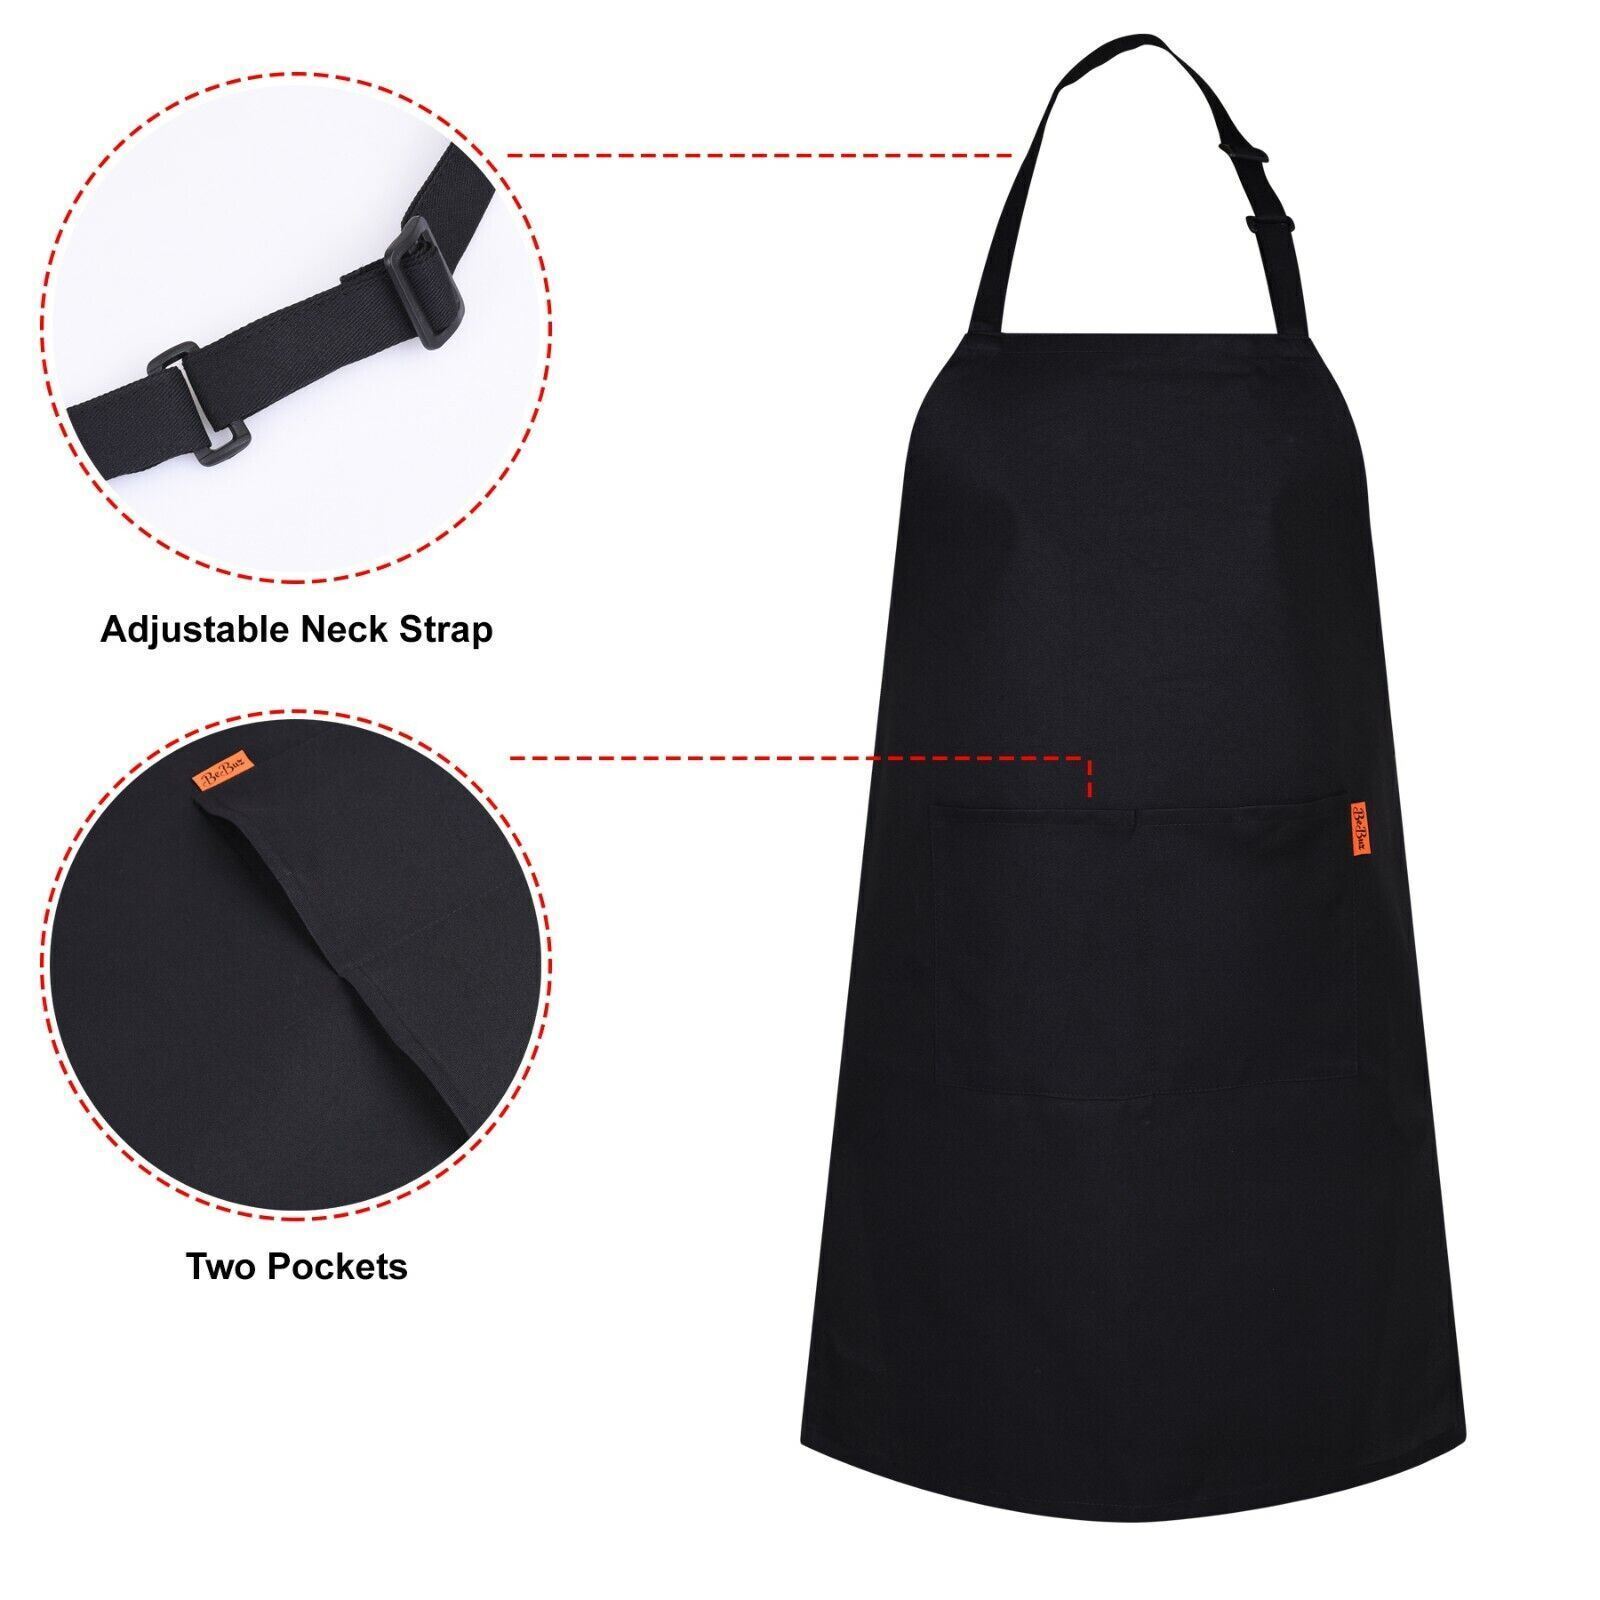 Old Lives Matter BBQ Printing Kitchen cooking Chef Aprons for Men Women - Top Tee